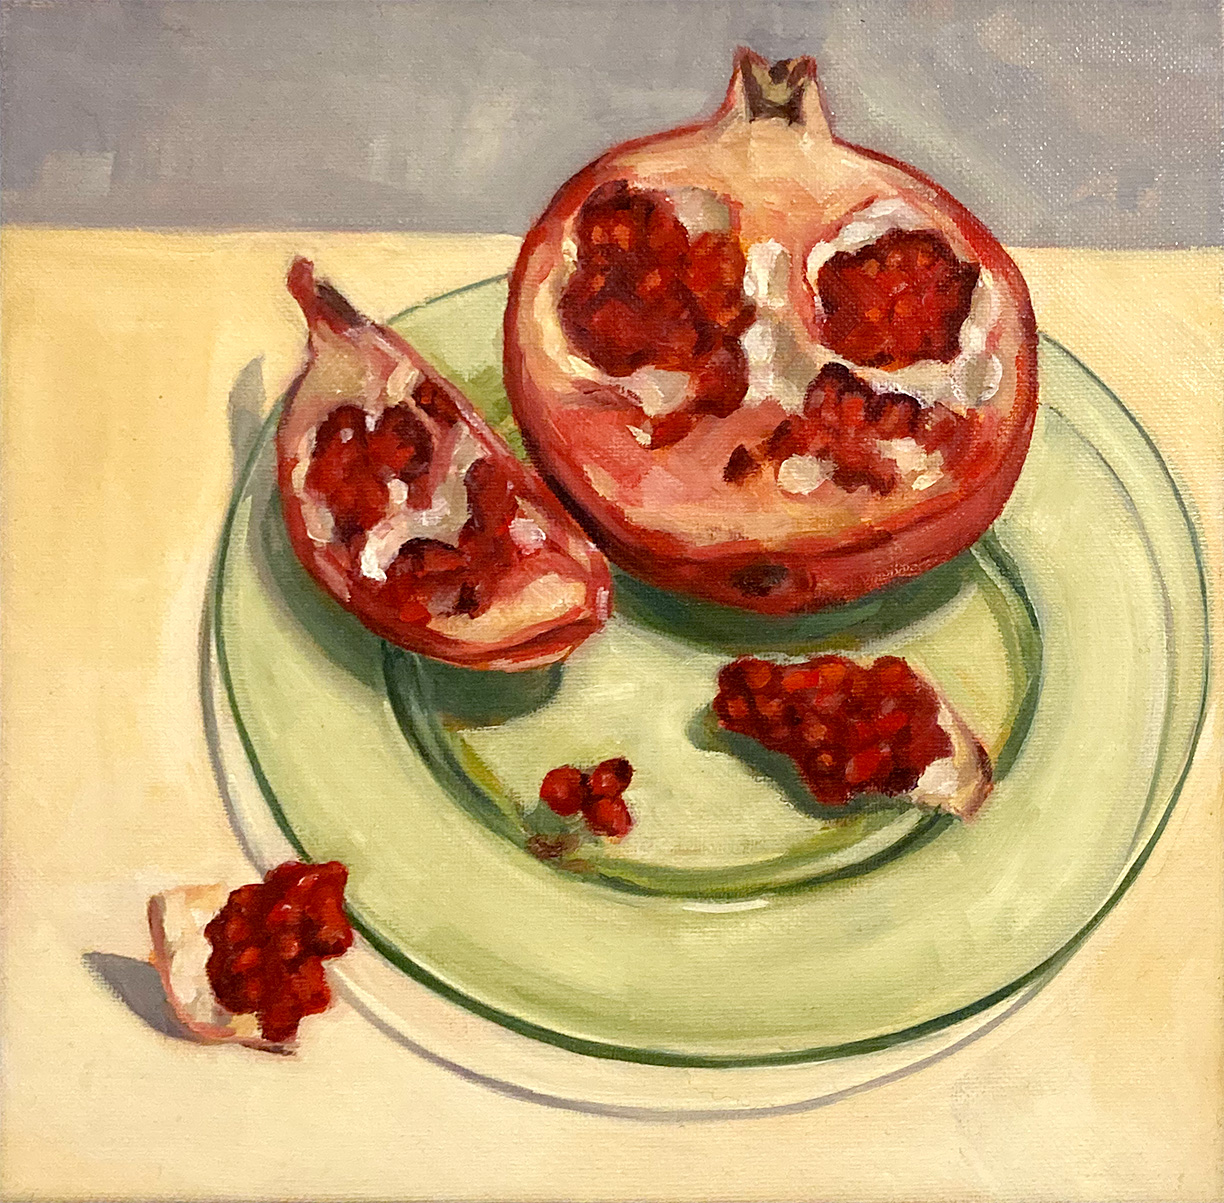 Painting of pomegranate slices on a green glass plate.